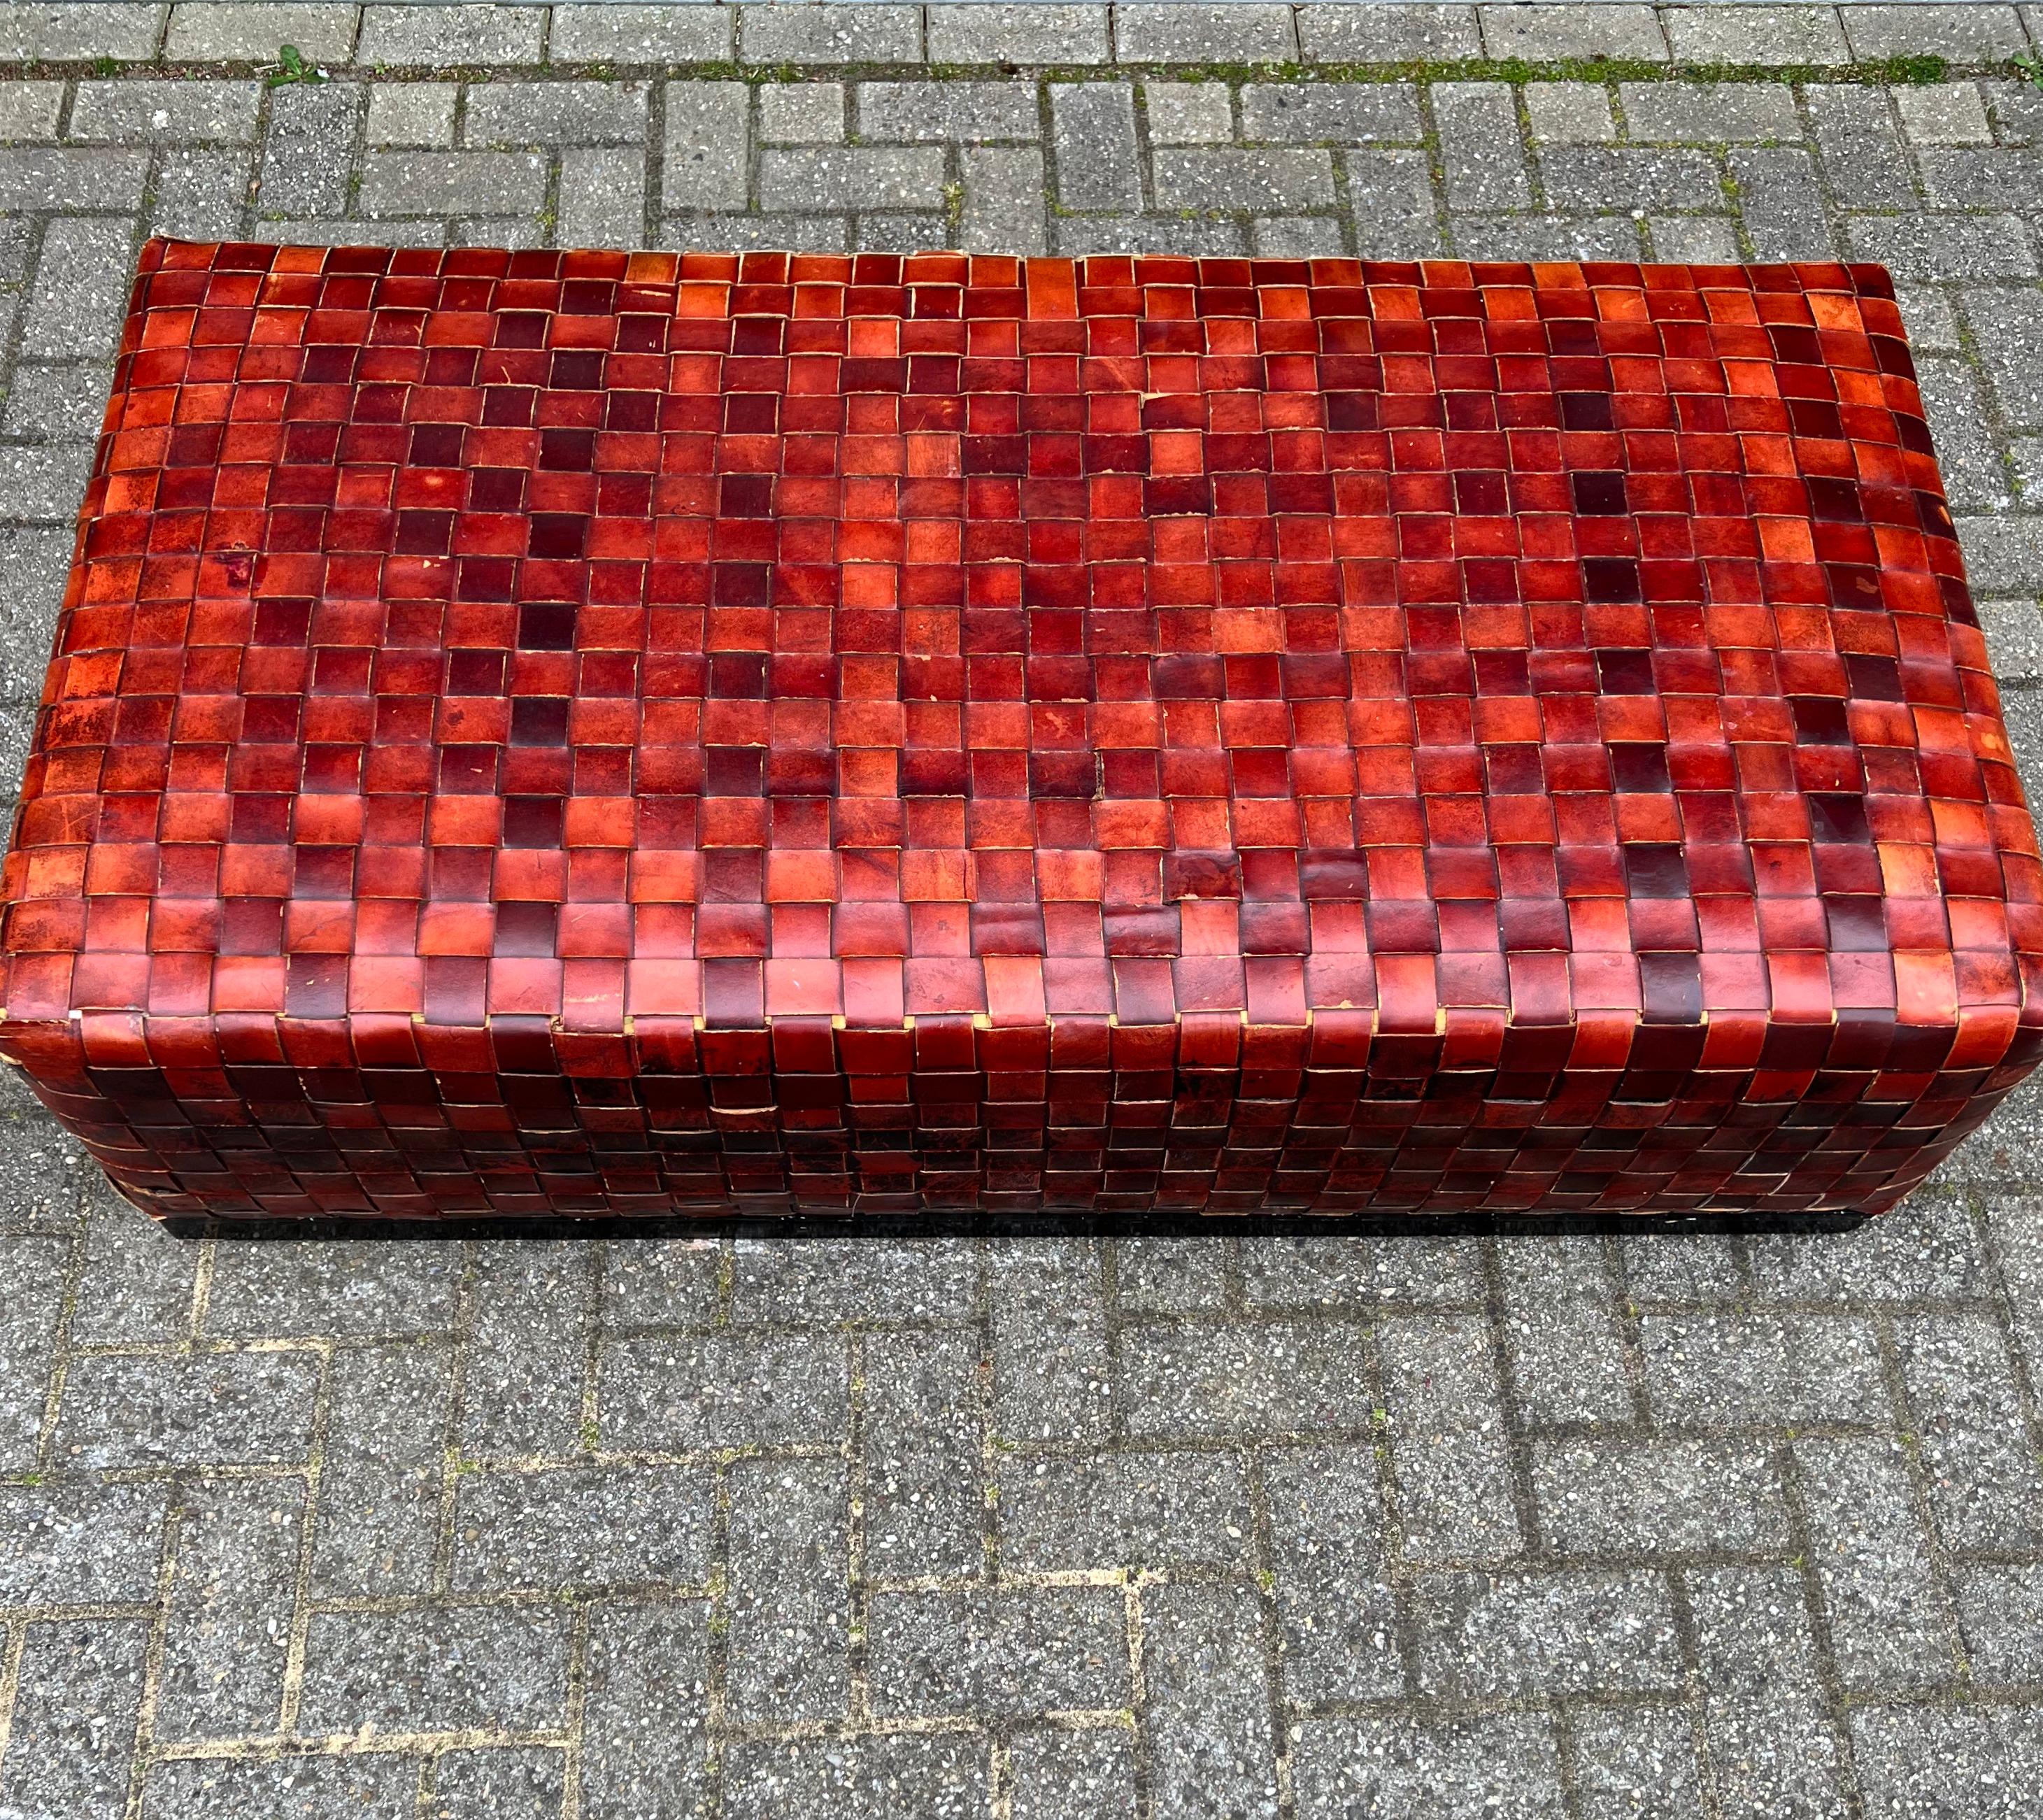 20th Century Large and Rare Double Rail Woven Leather Coffee Table or Ottoman Bench, 1990s For Sale